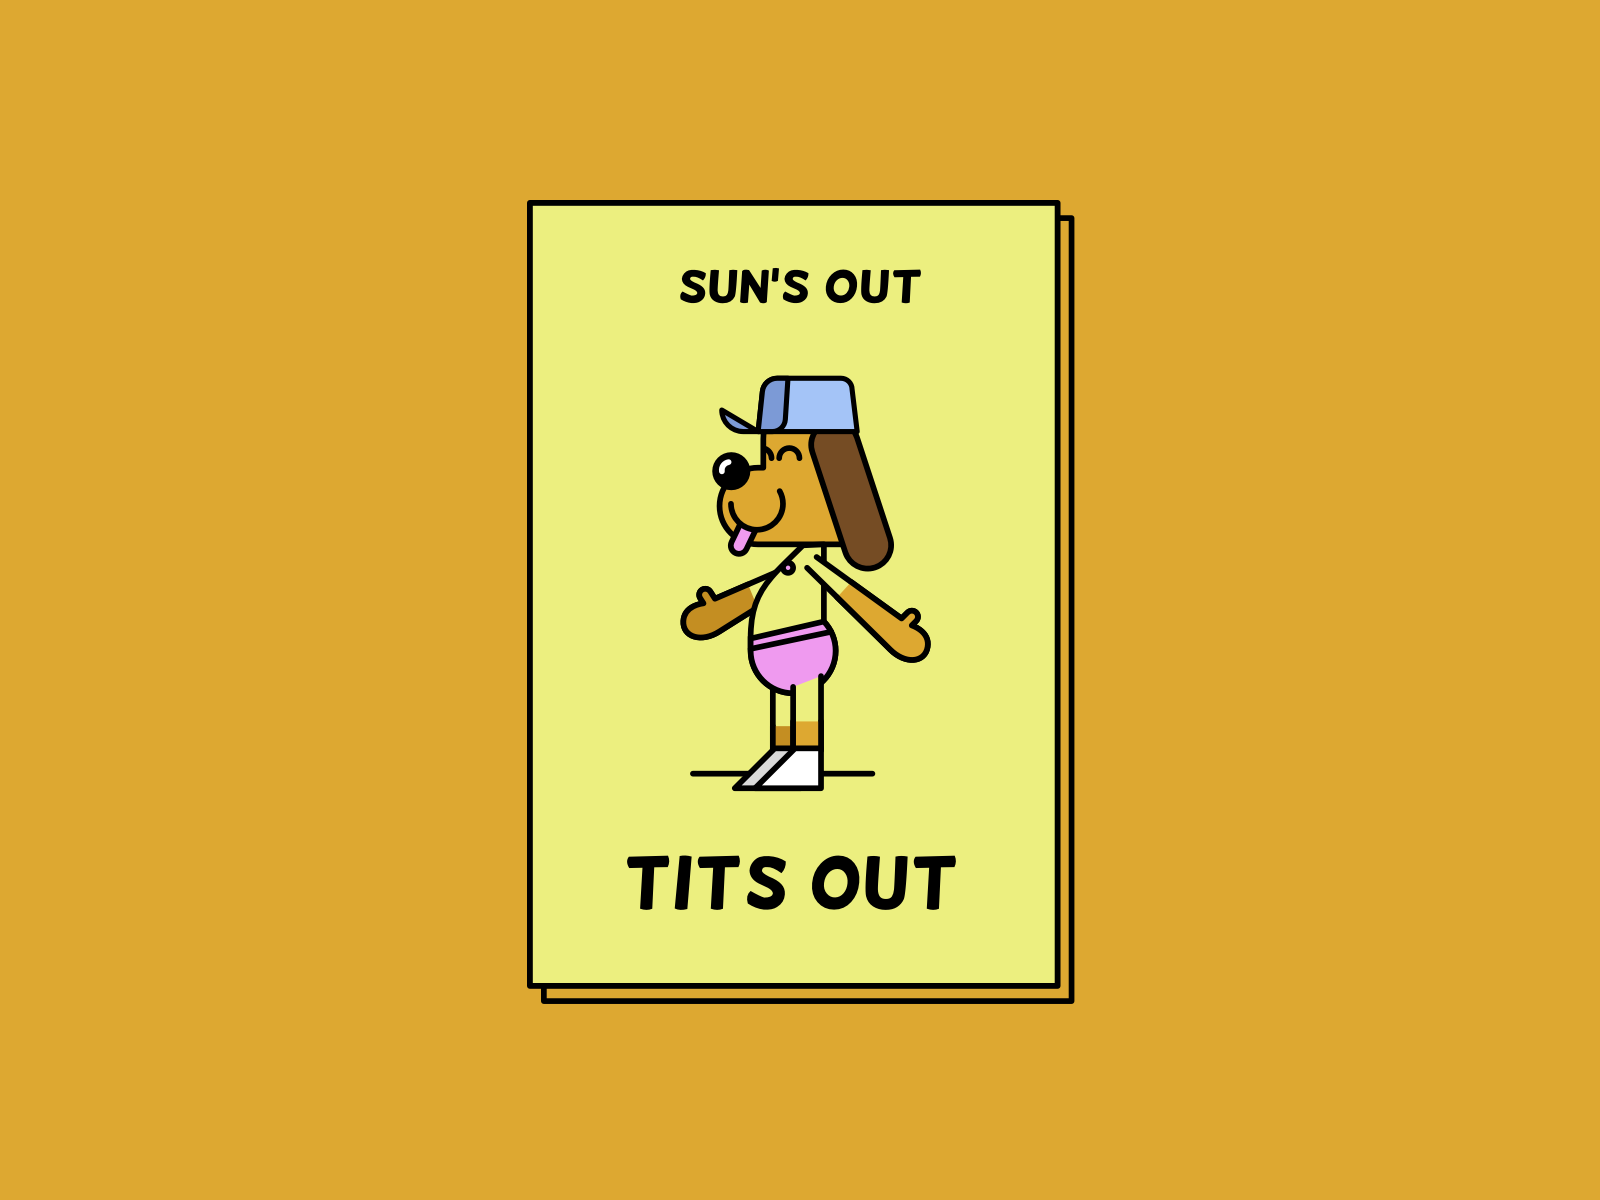 Tits Out by George Xanthos AKA Weirdink on Dribbble